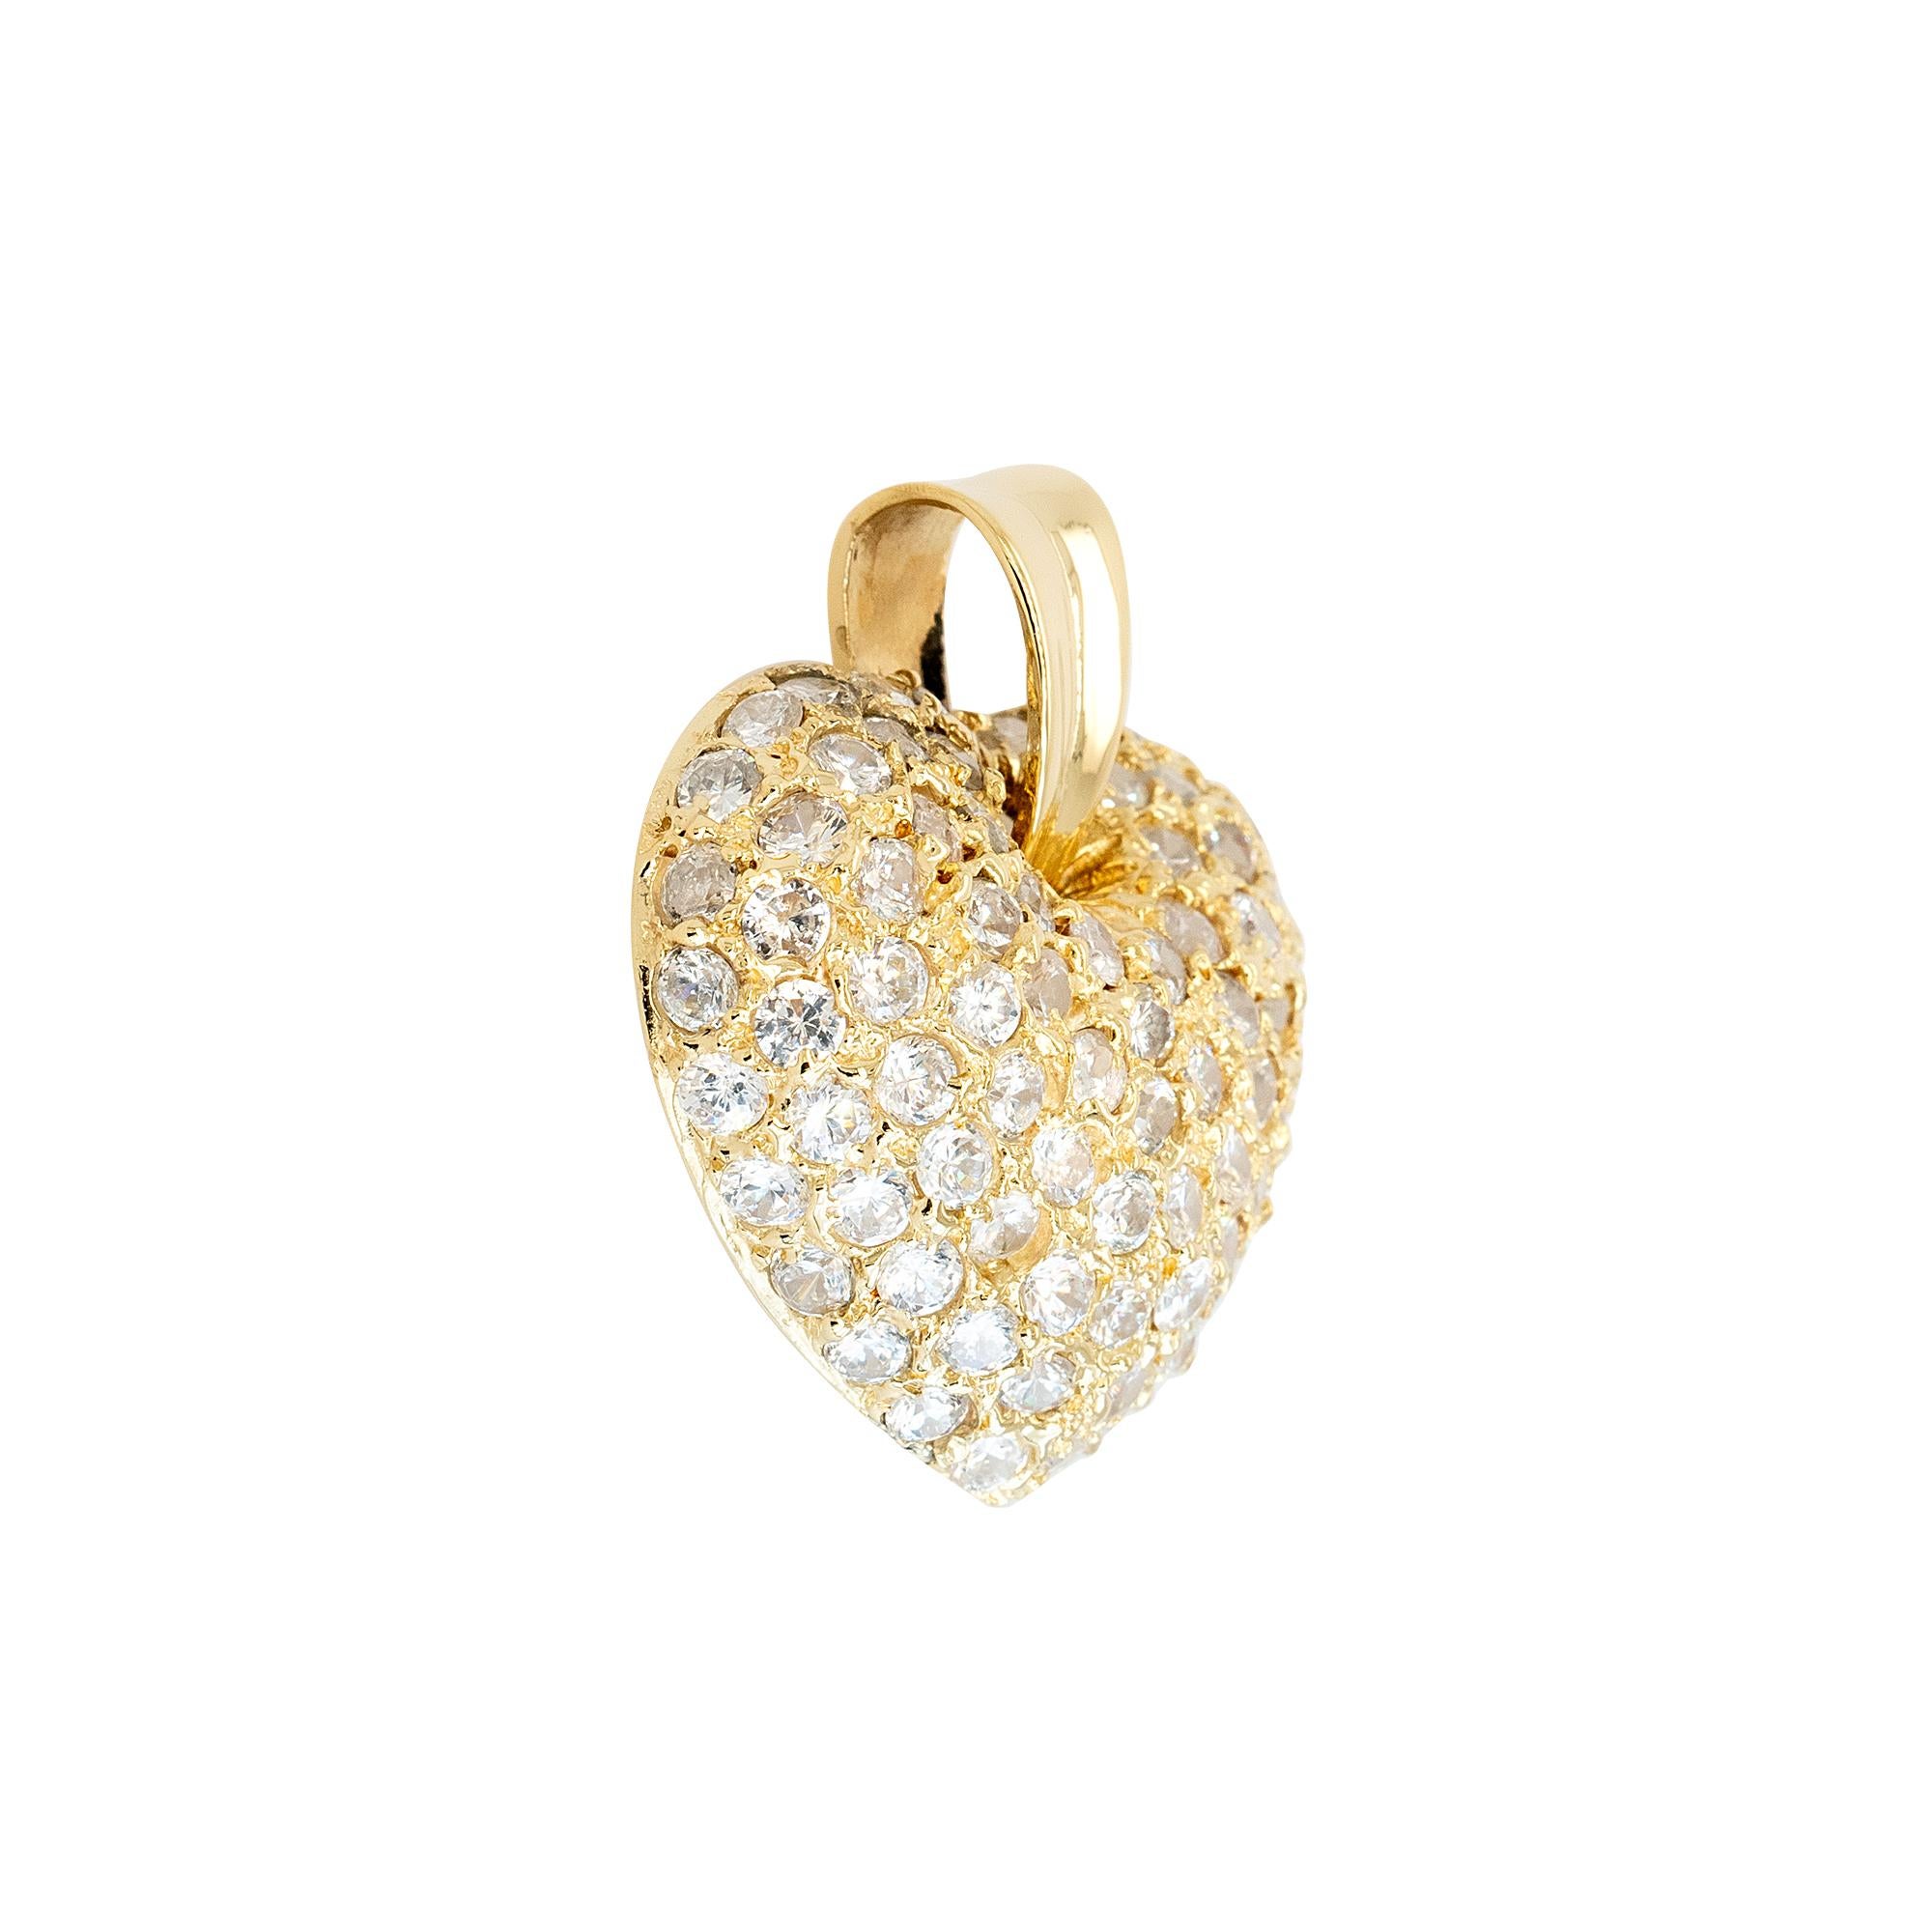 Pendant Details:
1.26ctw Round Brilliant Natural Diamond
84 Stones 0.015ct
G/H color VS clarity
Pendant Material: 18k Yellow Gold
Pendant Size: 26.9mm x 30.7 x 8.8mm
Total Weight: 11.7g (7.5dwt)
This item comes with a presentation box!
SKU: